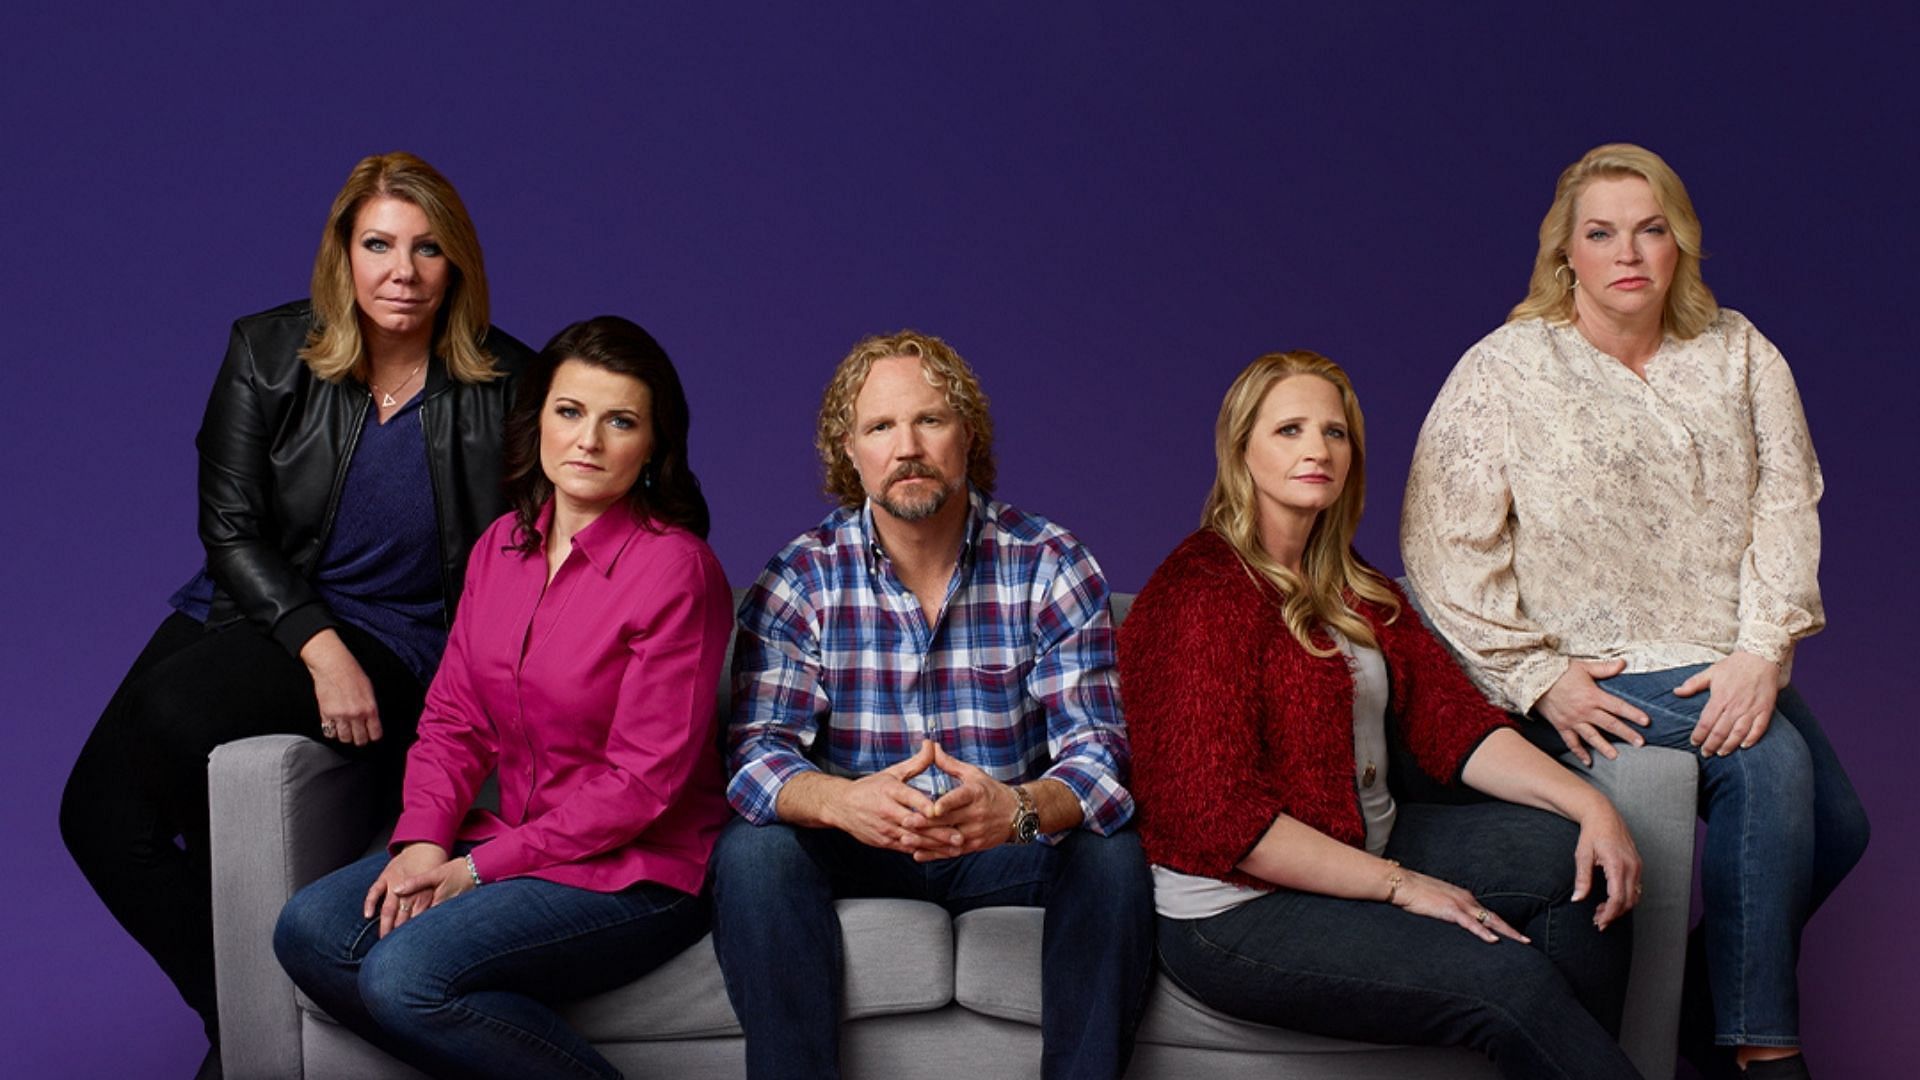 Kody Brown questions his polygamous marriage on Sister Wives Tell-All (Image via tlc/Instagram)